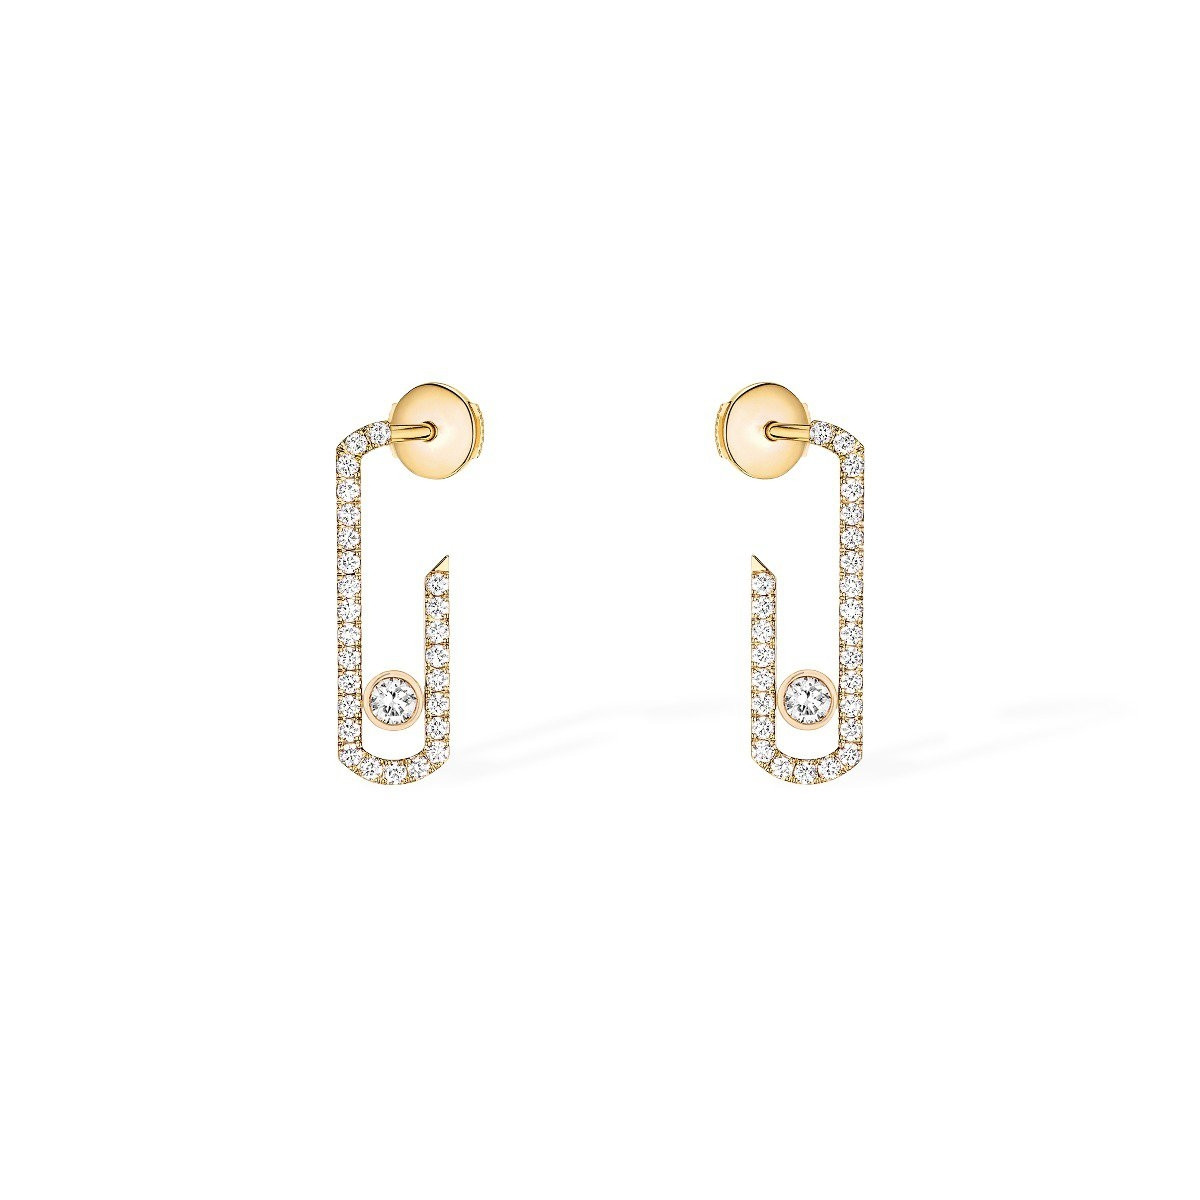 Messika Move Addiction Diamond Drop Earrings in 18K Gold front view